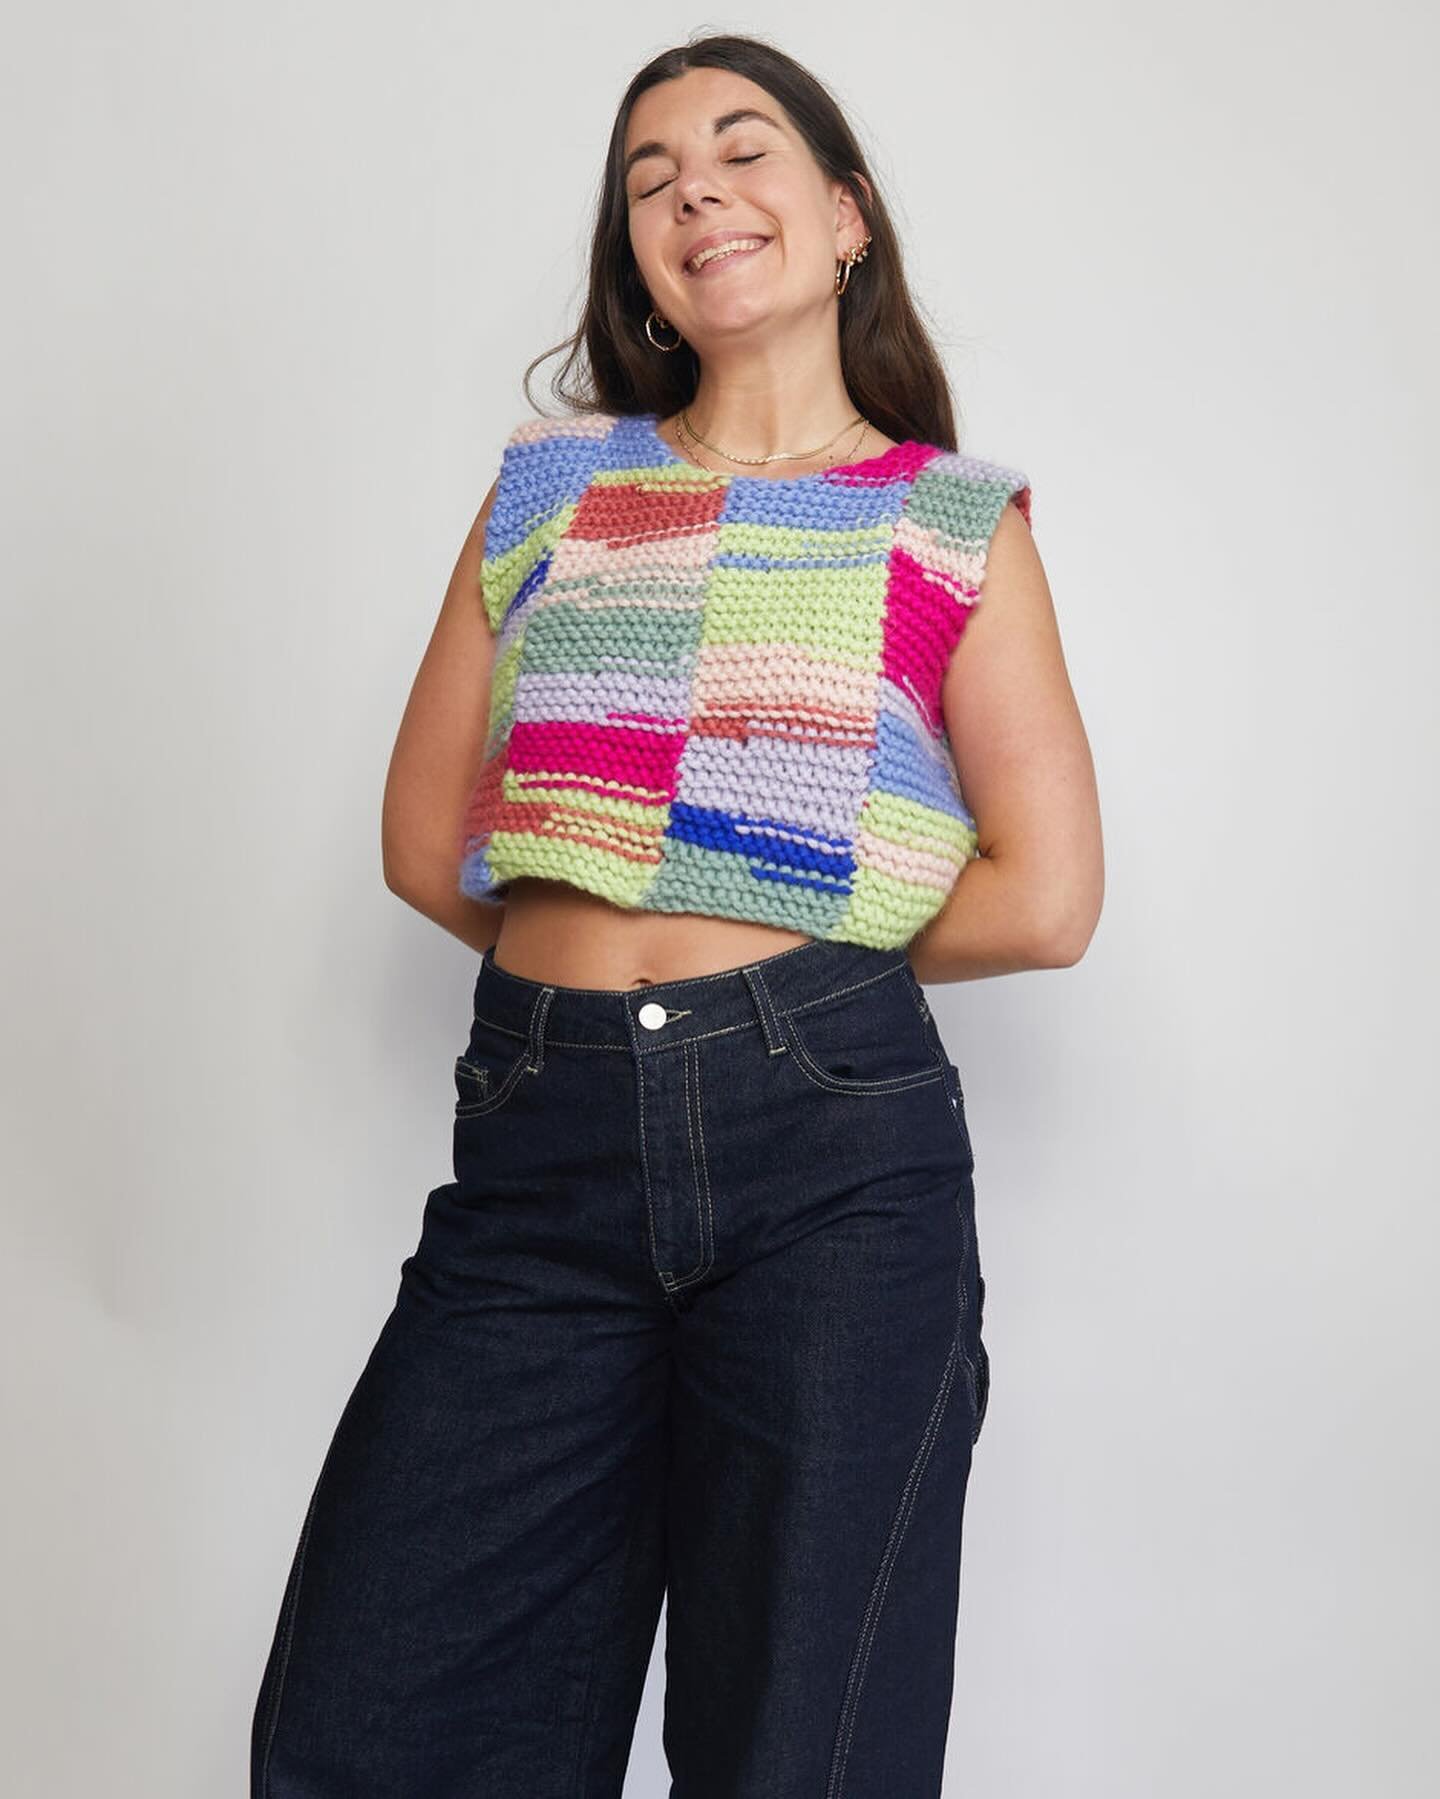 I made a pattern for @woolandthegang !!! It&rsquo;s called the &lsquo;scrappy tank&rsquo; and it&rsquo;s all about using up your odd &amp; old balls of wool ♻️💘

It&rsquo;s beginner friendly so if you want to get into knitting or don&rsquo;t have mu